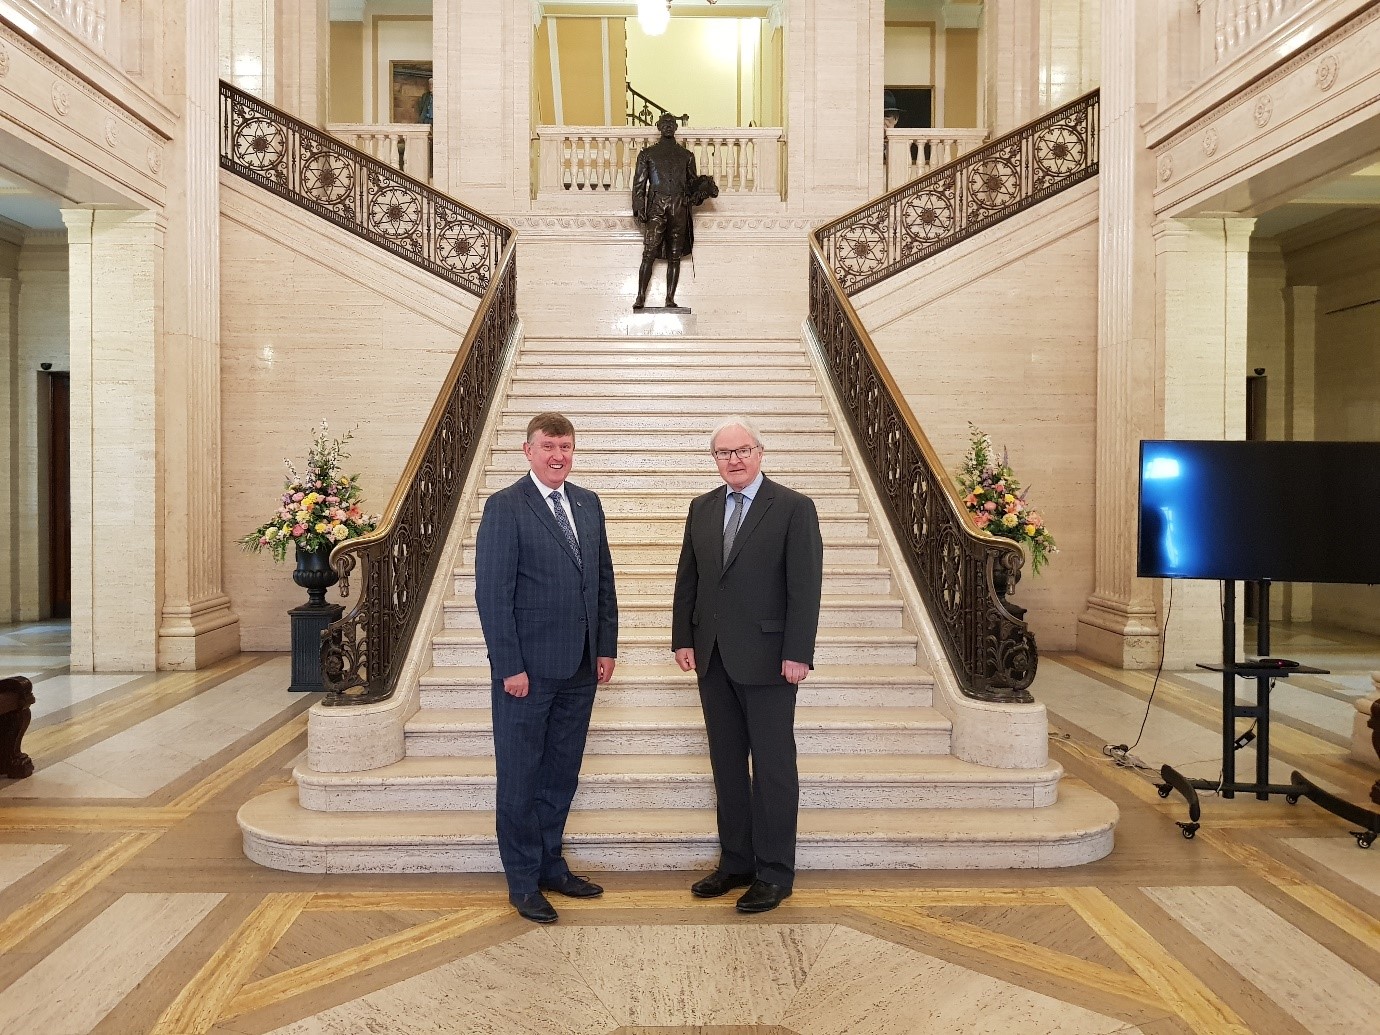 Committee Chairperson, Mervyn Storey MLA, with the Lord Chief Justice, Sir Declan Morgan, prior to his attendance at the Committee Meeting on 24 June 2021